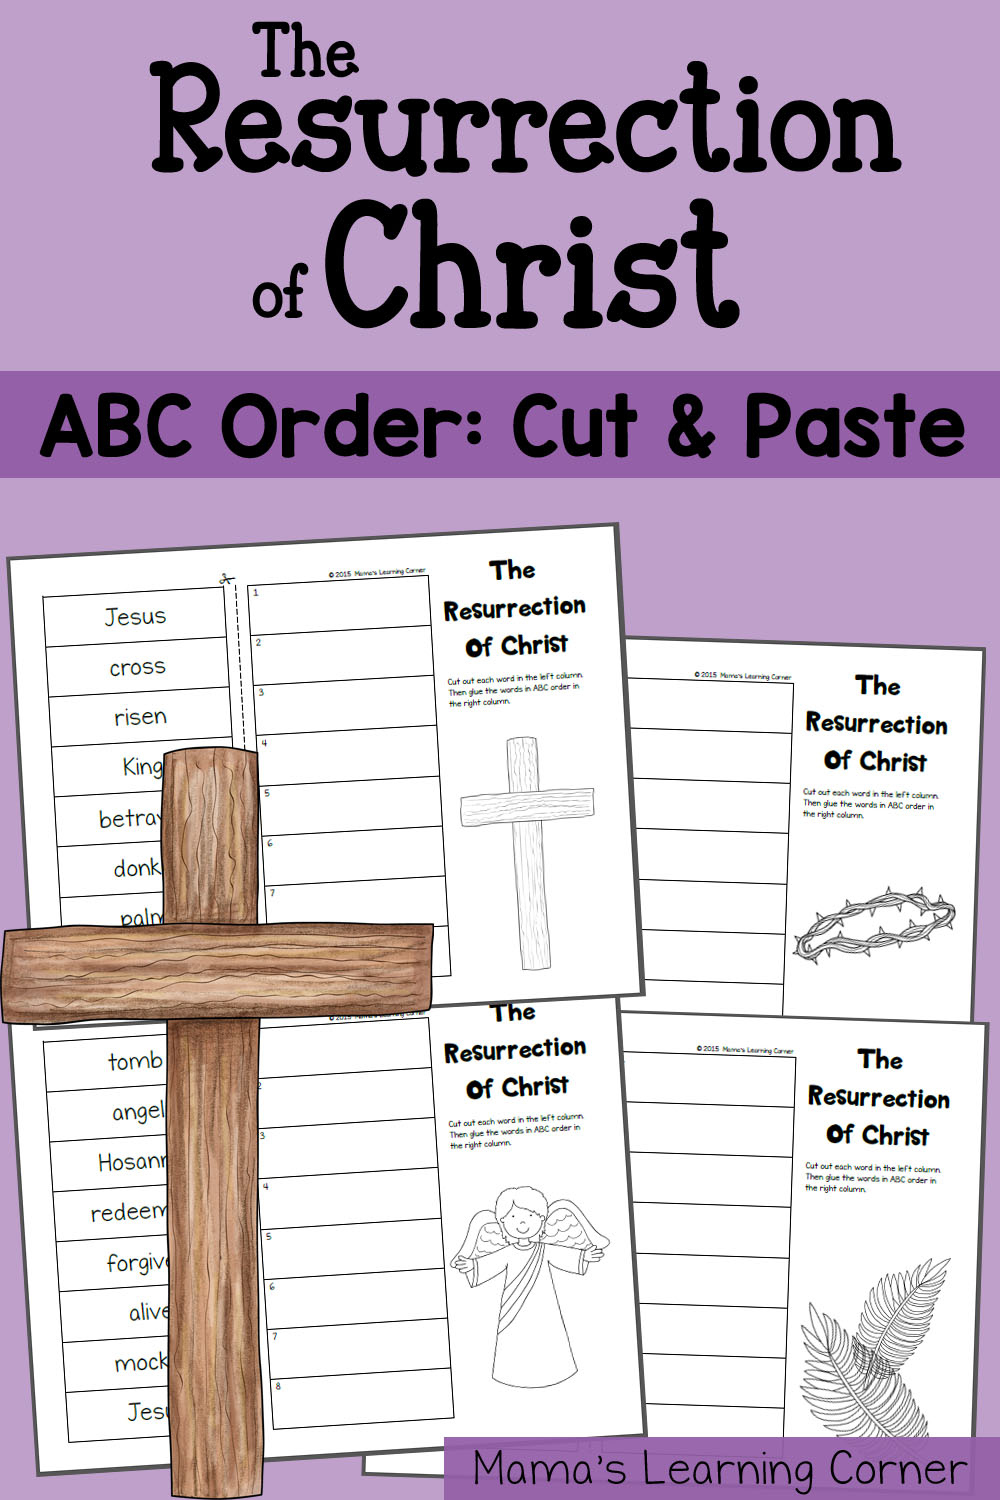 ABC Order Worksheet Cut And Paste The Resurrection Of Christ 